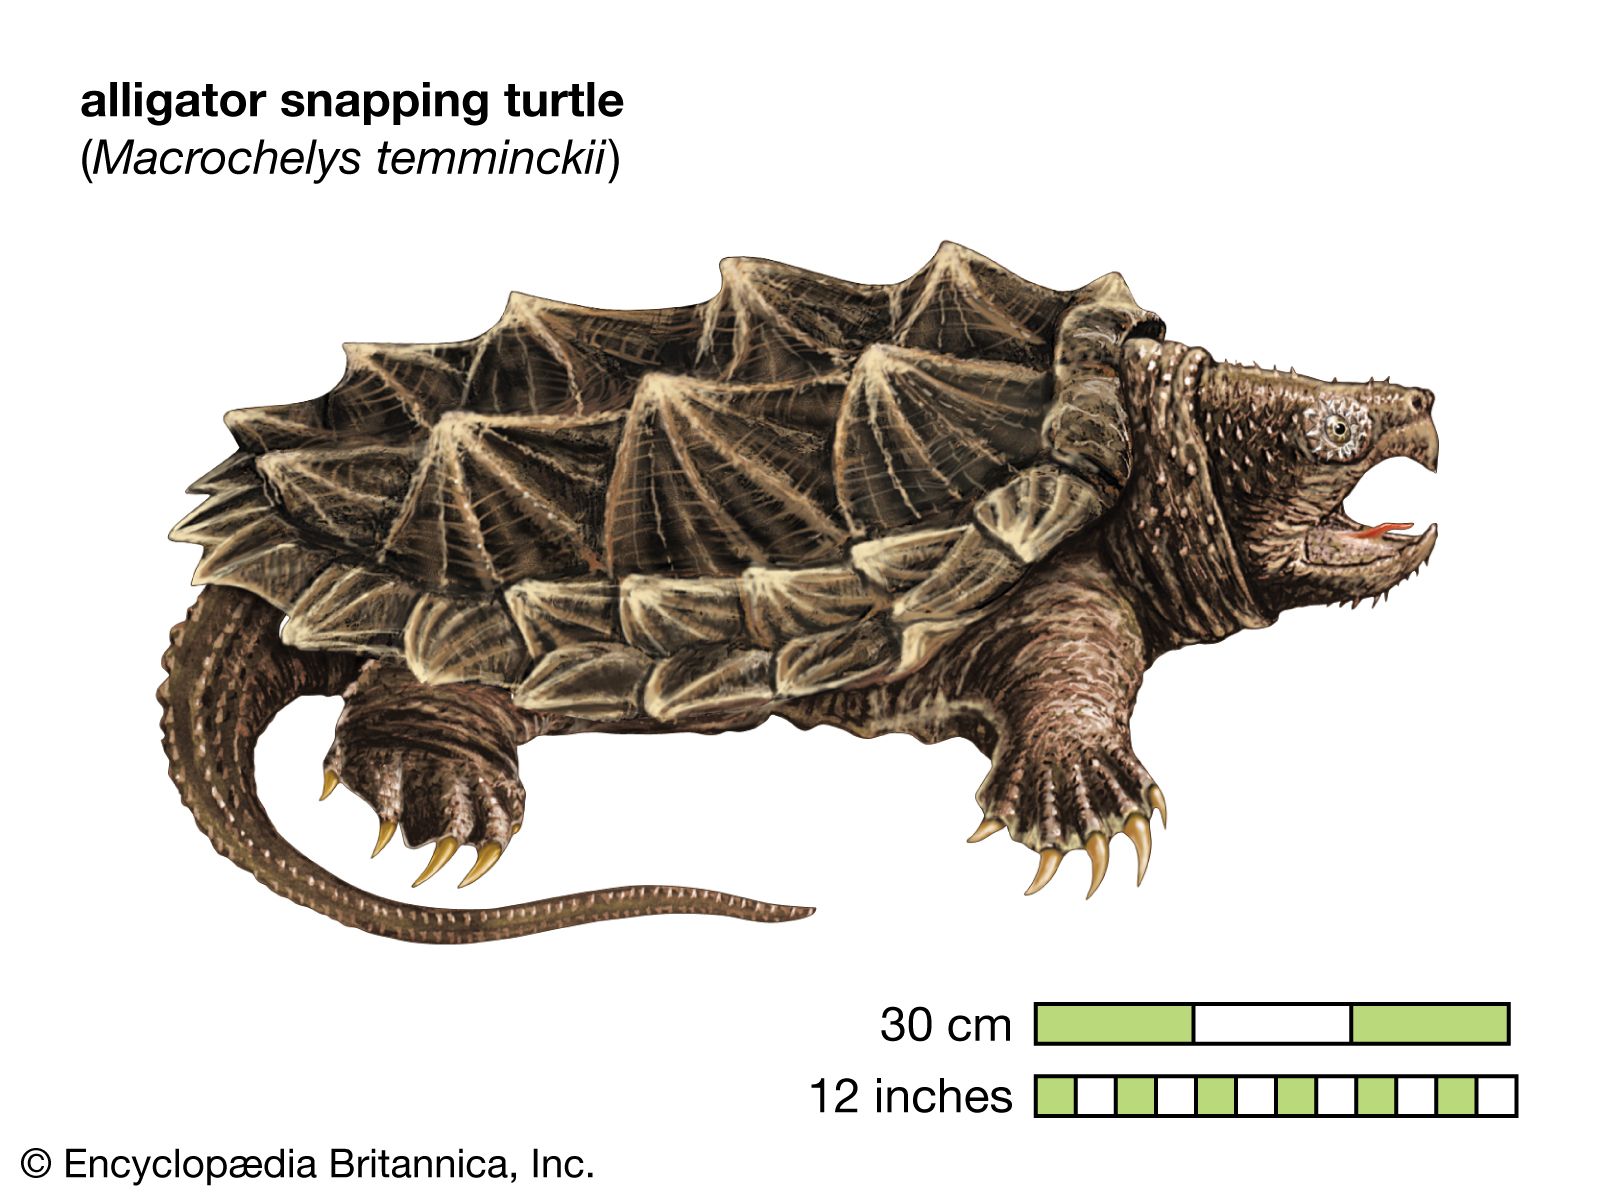 How Big Does an Alligator Snapping Turtle Get